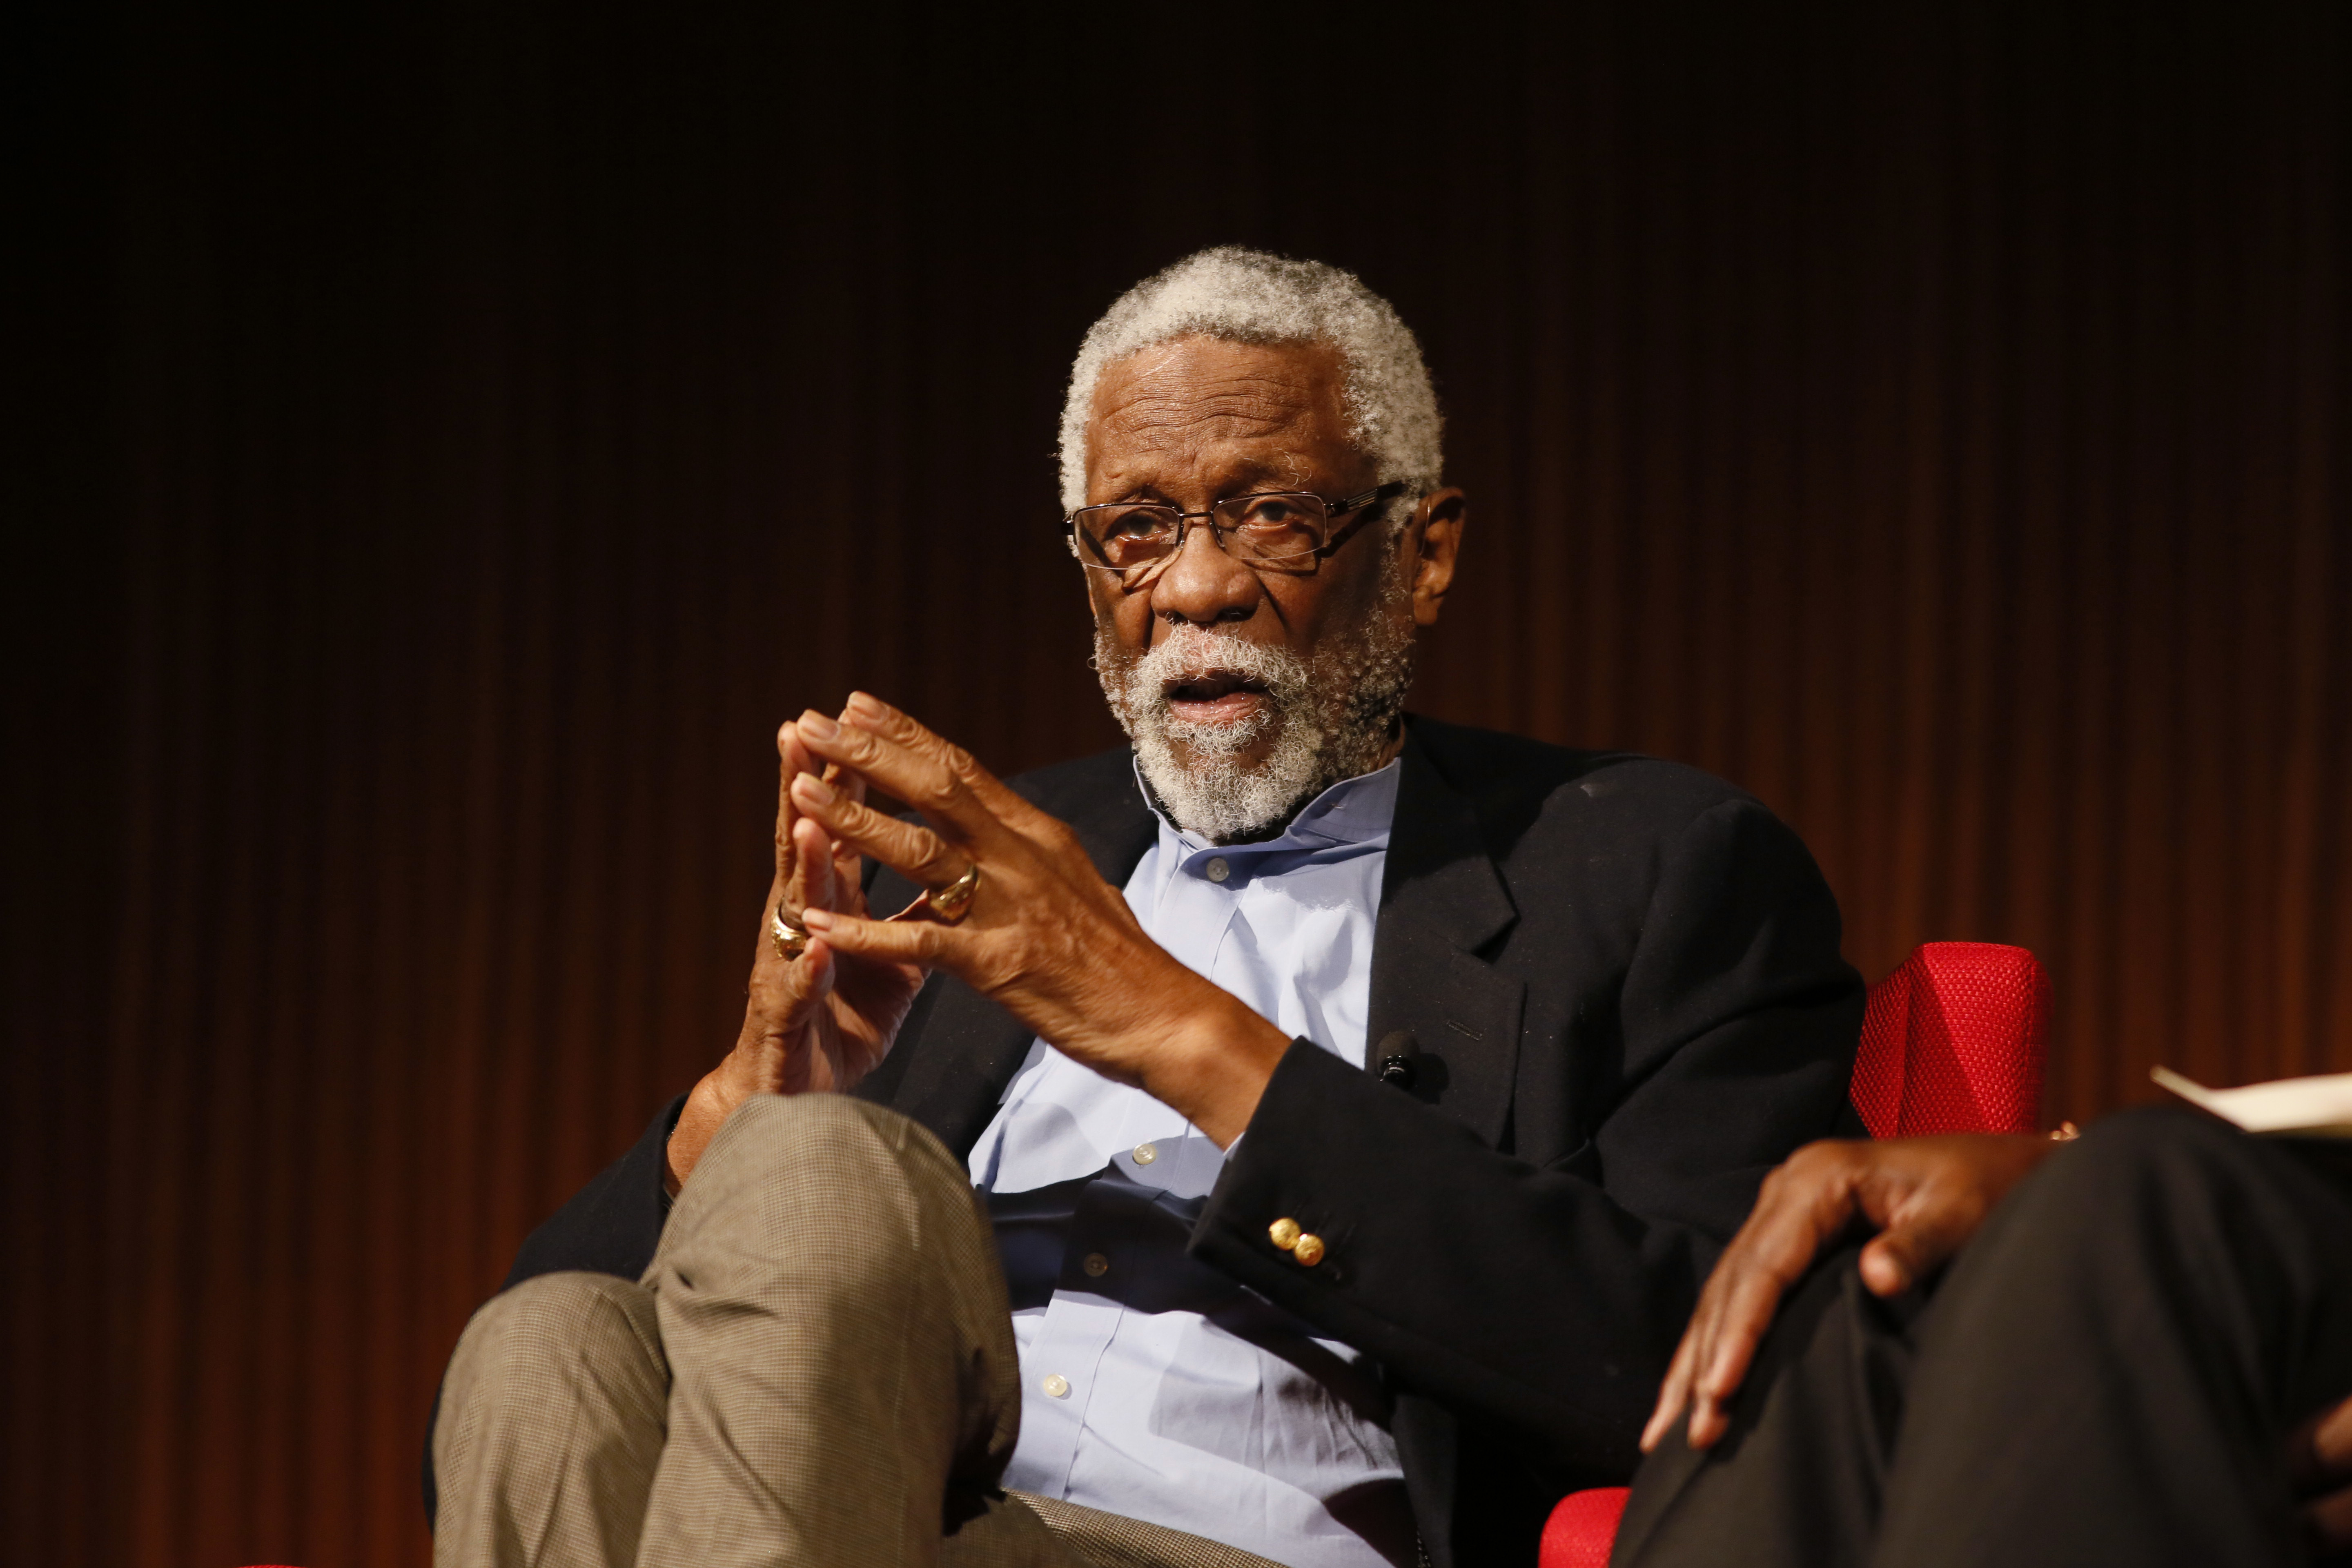 Bill Russell, NBA great and longtime activist, dies at 88 - POLITICO